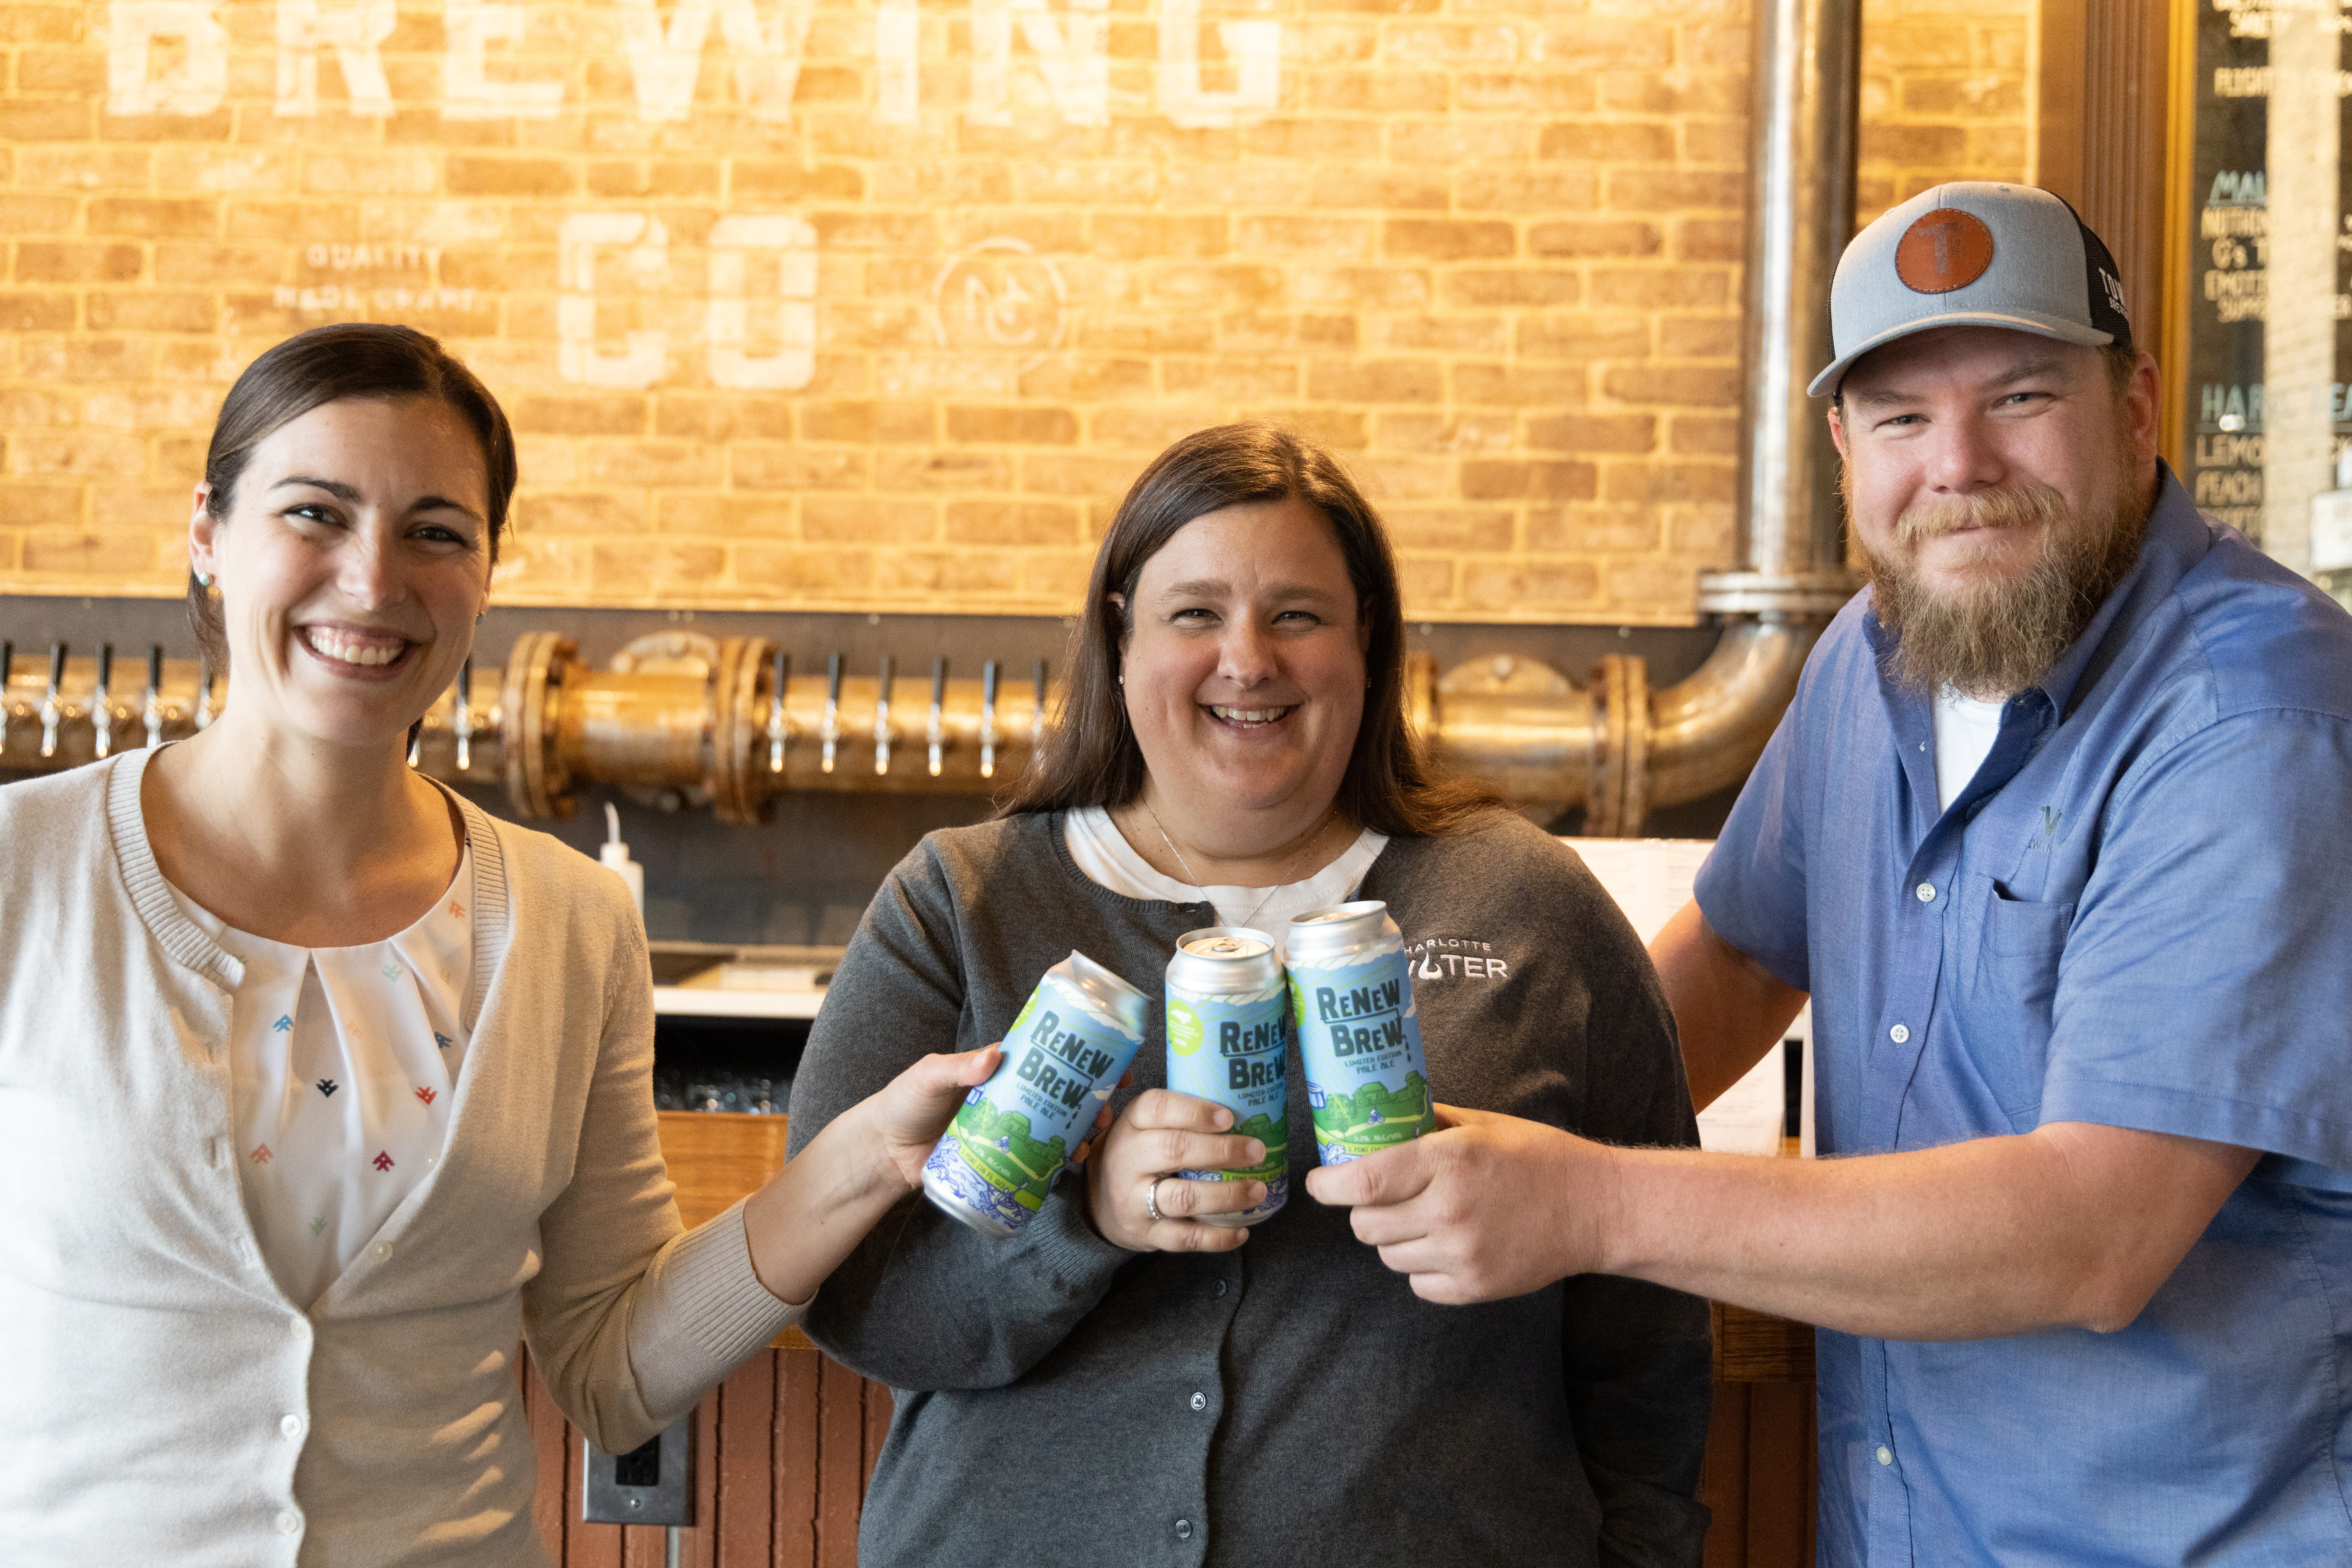 Nicole Pennington (Xylem), Jennifer Frost (Charlotte Water), and Brandon Stirewalt (Town Brewing Company) posing with cans of Renew Brew.